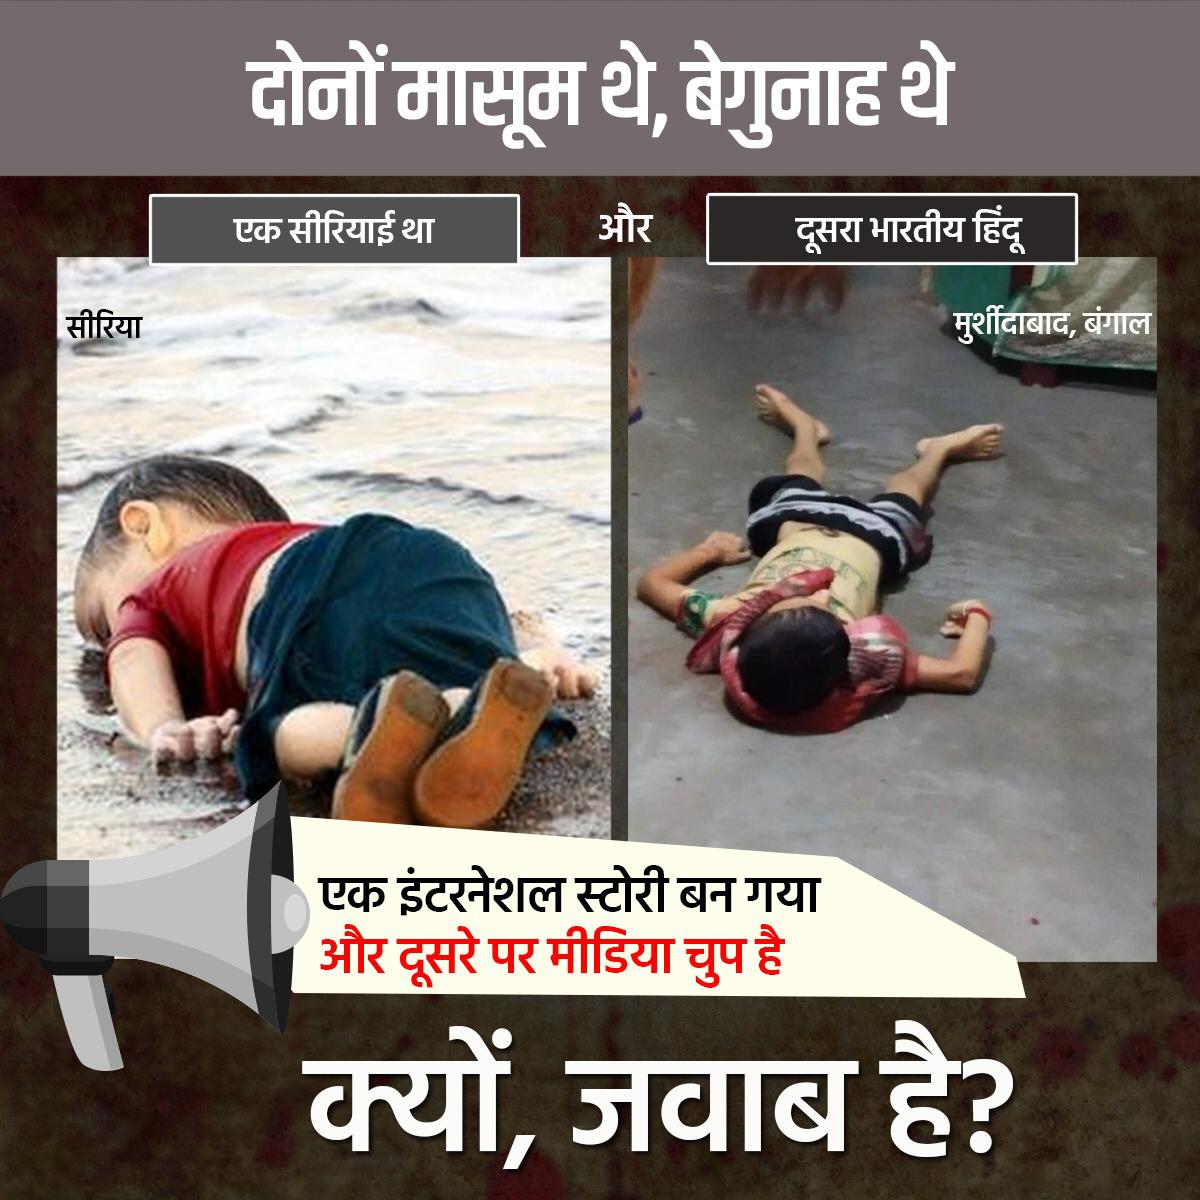 Both incidents involve an innocent child. The first picture had united people in their compassion, grief and outrage across the entire world for a long time. The second picture will be spoken about in hushed tones, make people uncomfortable and be quickly forgotten. WHY???